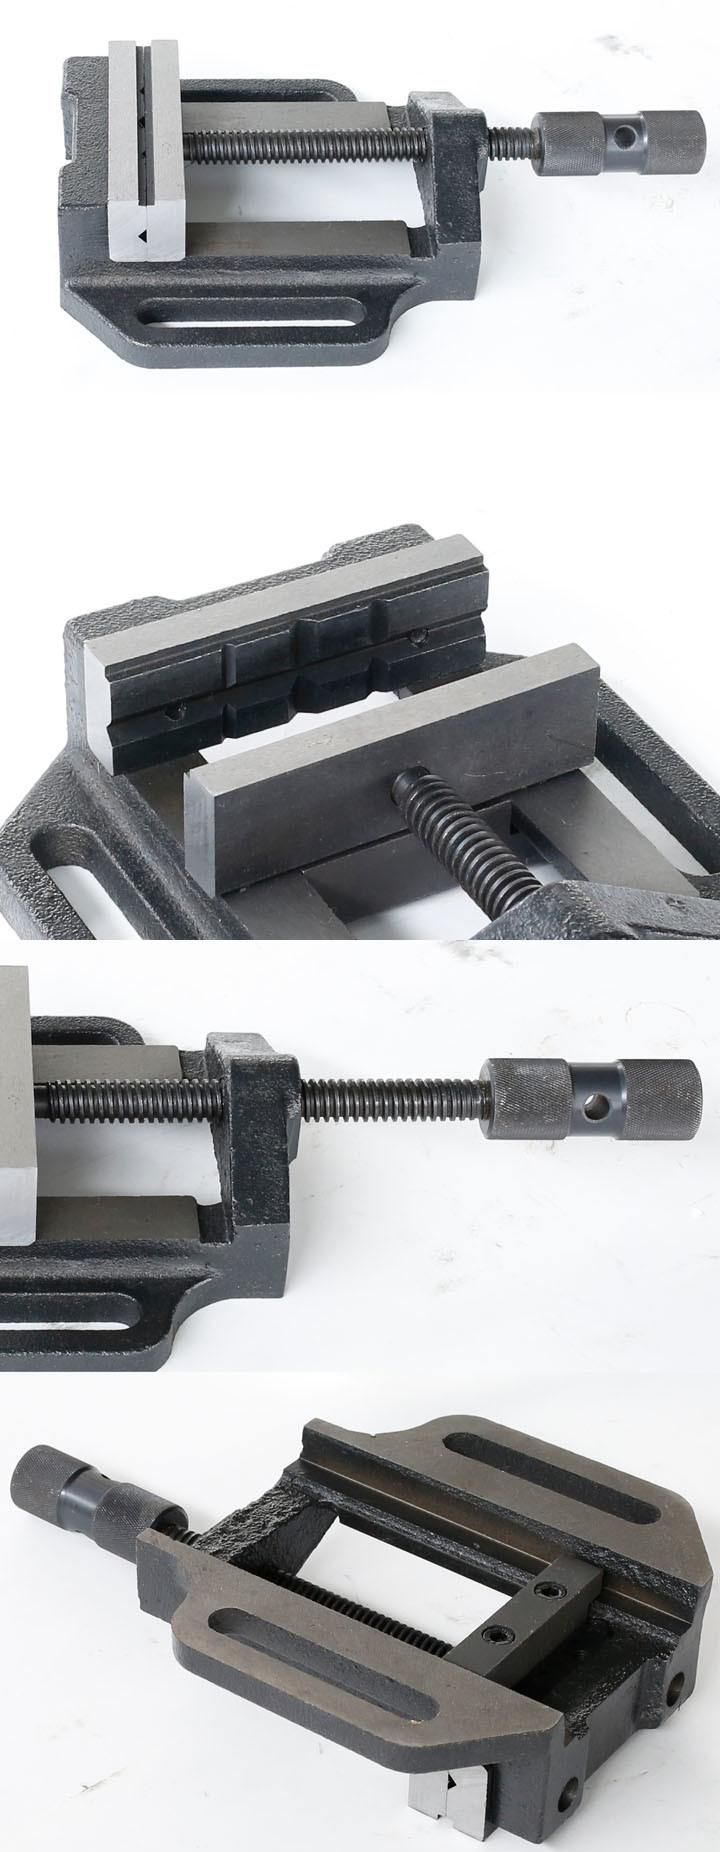 Secure Gripping Drill Press Vise